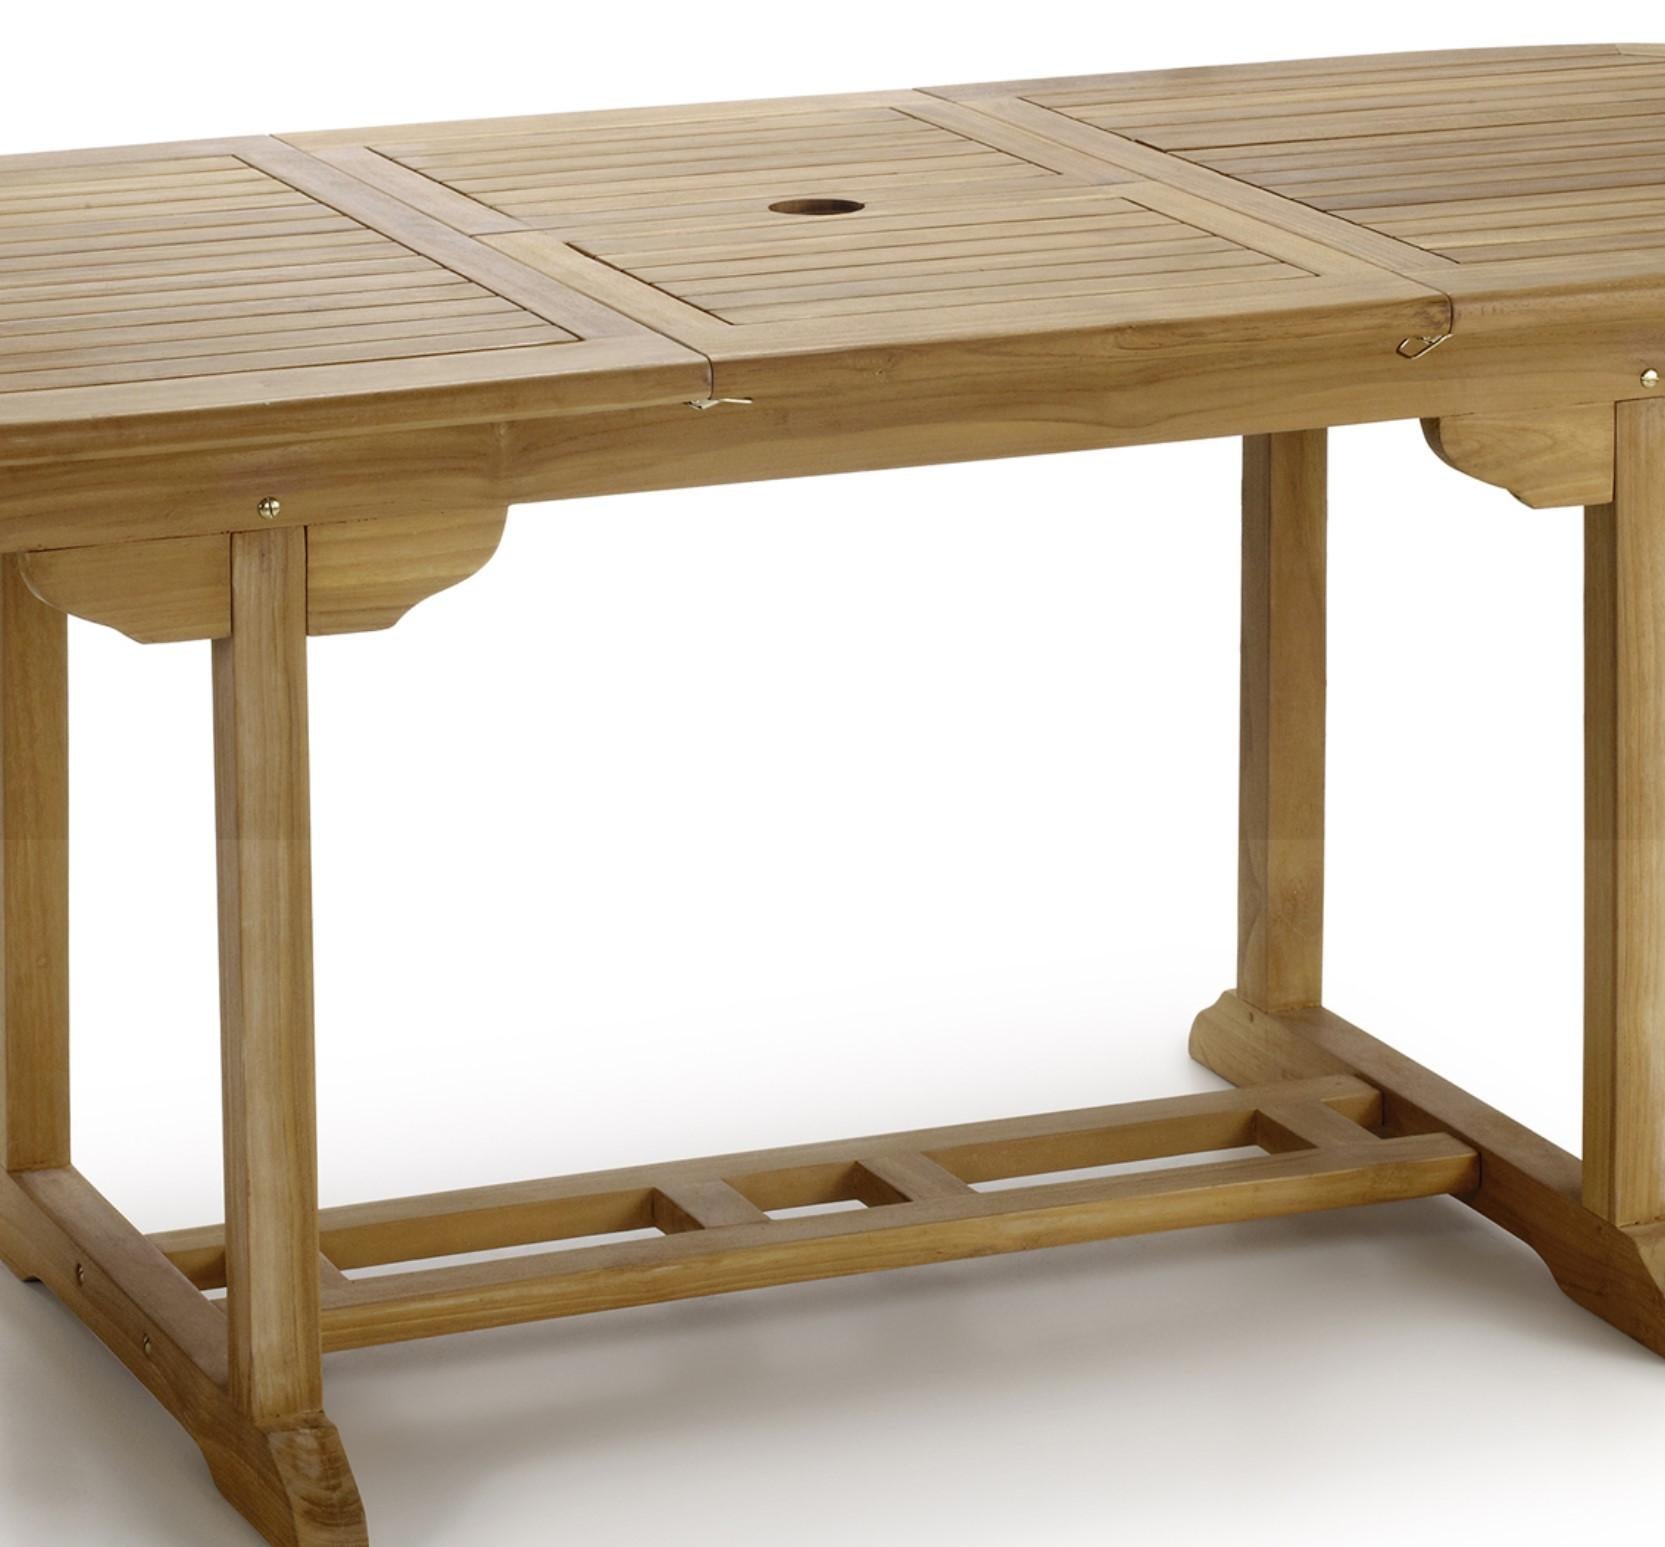 New teak oval foldable dining table, indoor and outdoor

Extendable: 66.92in-86.61in.